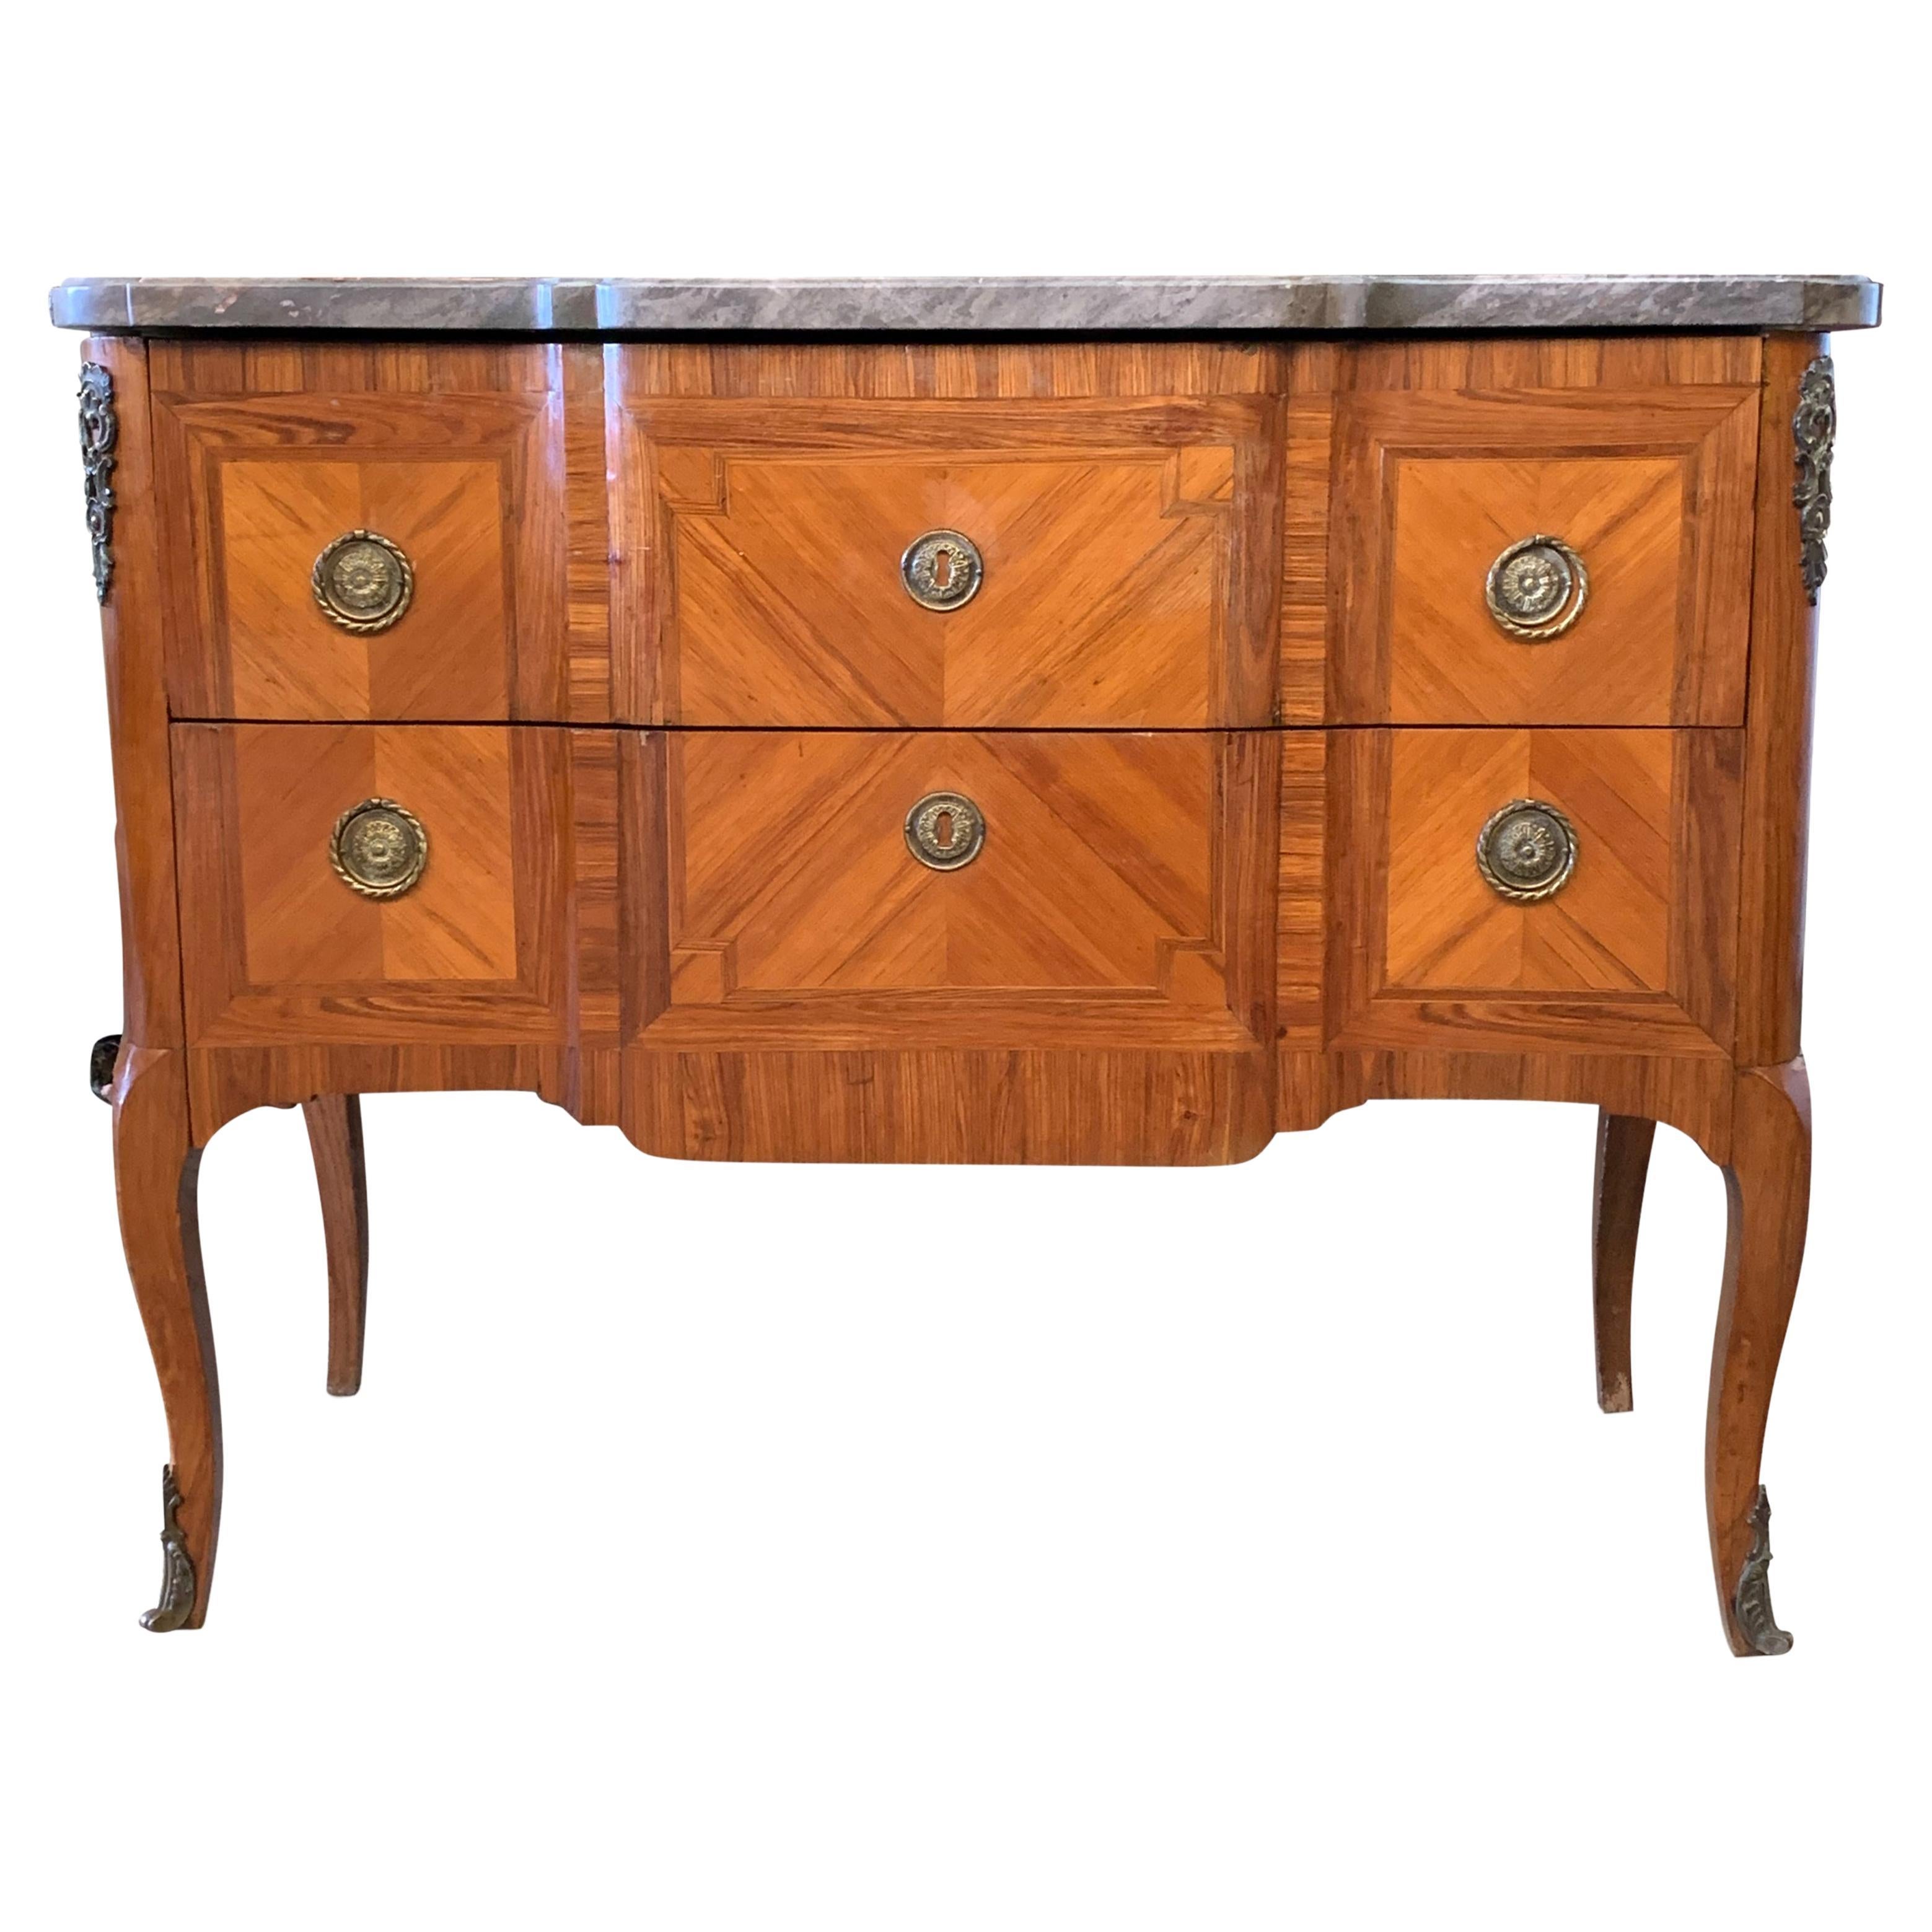 19th Century French Louis XVI Rosewood Banded Kingwood Commode with Cabriole Leg